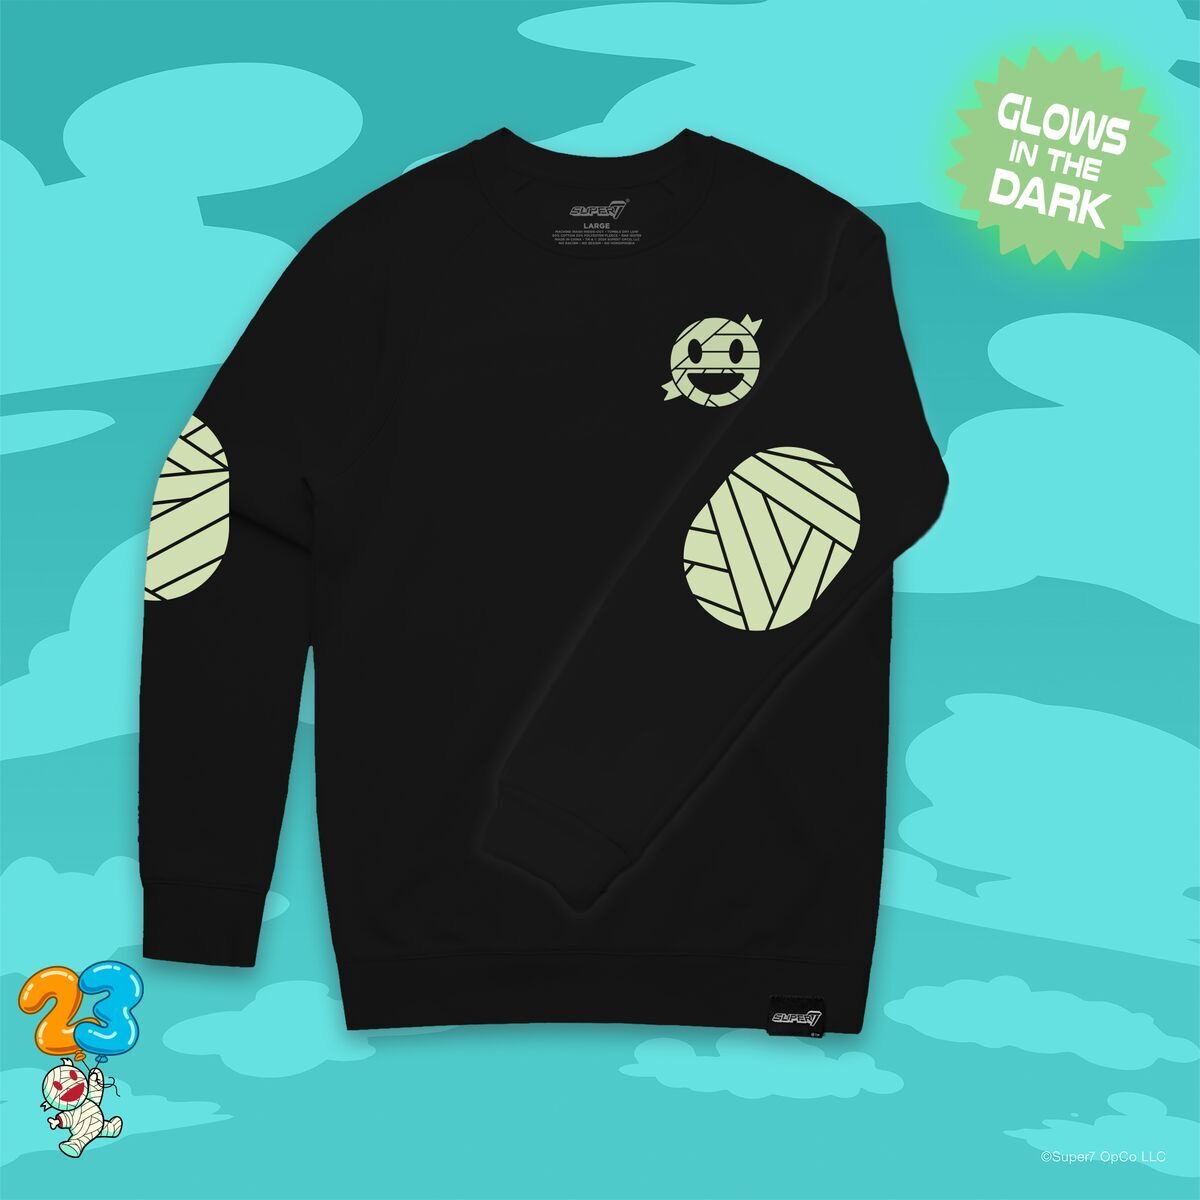 Celebrate Super7’s lovable mascot, Mummy Boy, with this fun yet sophisticated elbow patch crewneck! With our beloved Mummy Boy on the front, with bandage elbow patches on either arm - all screen printed in glow-in-the-dark ink! Pre-order now at Super7.com! #Super7